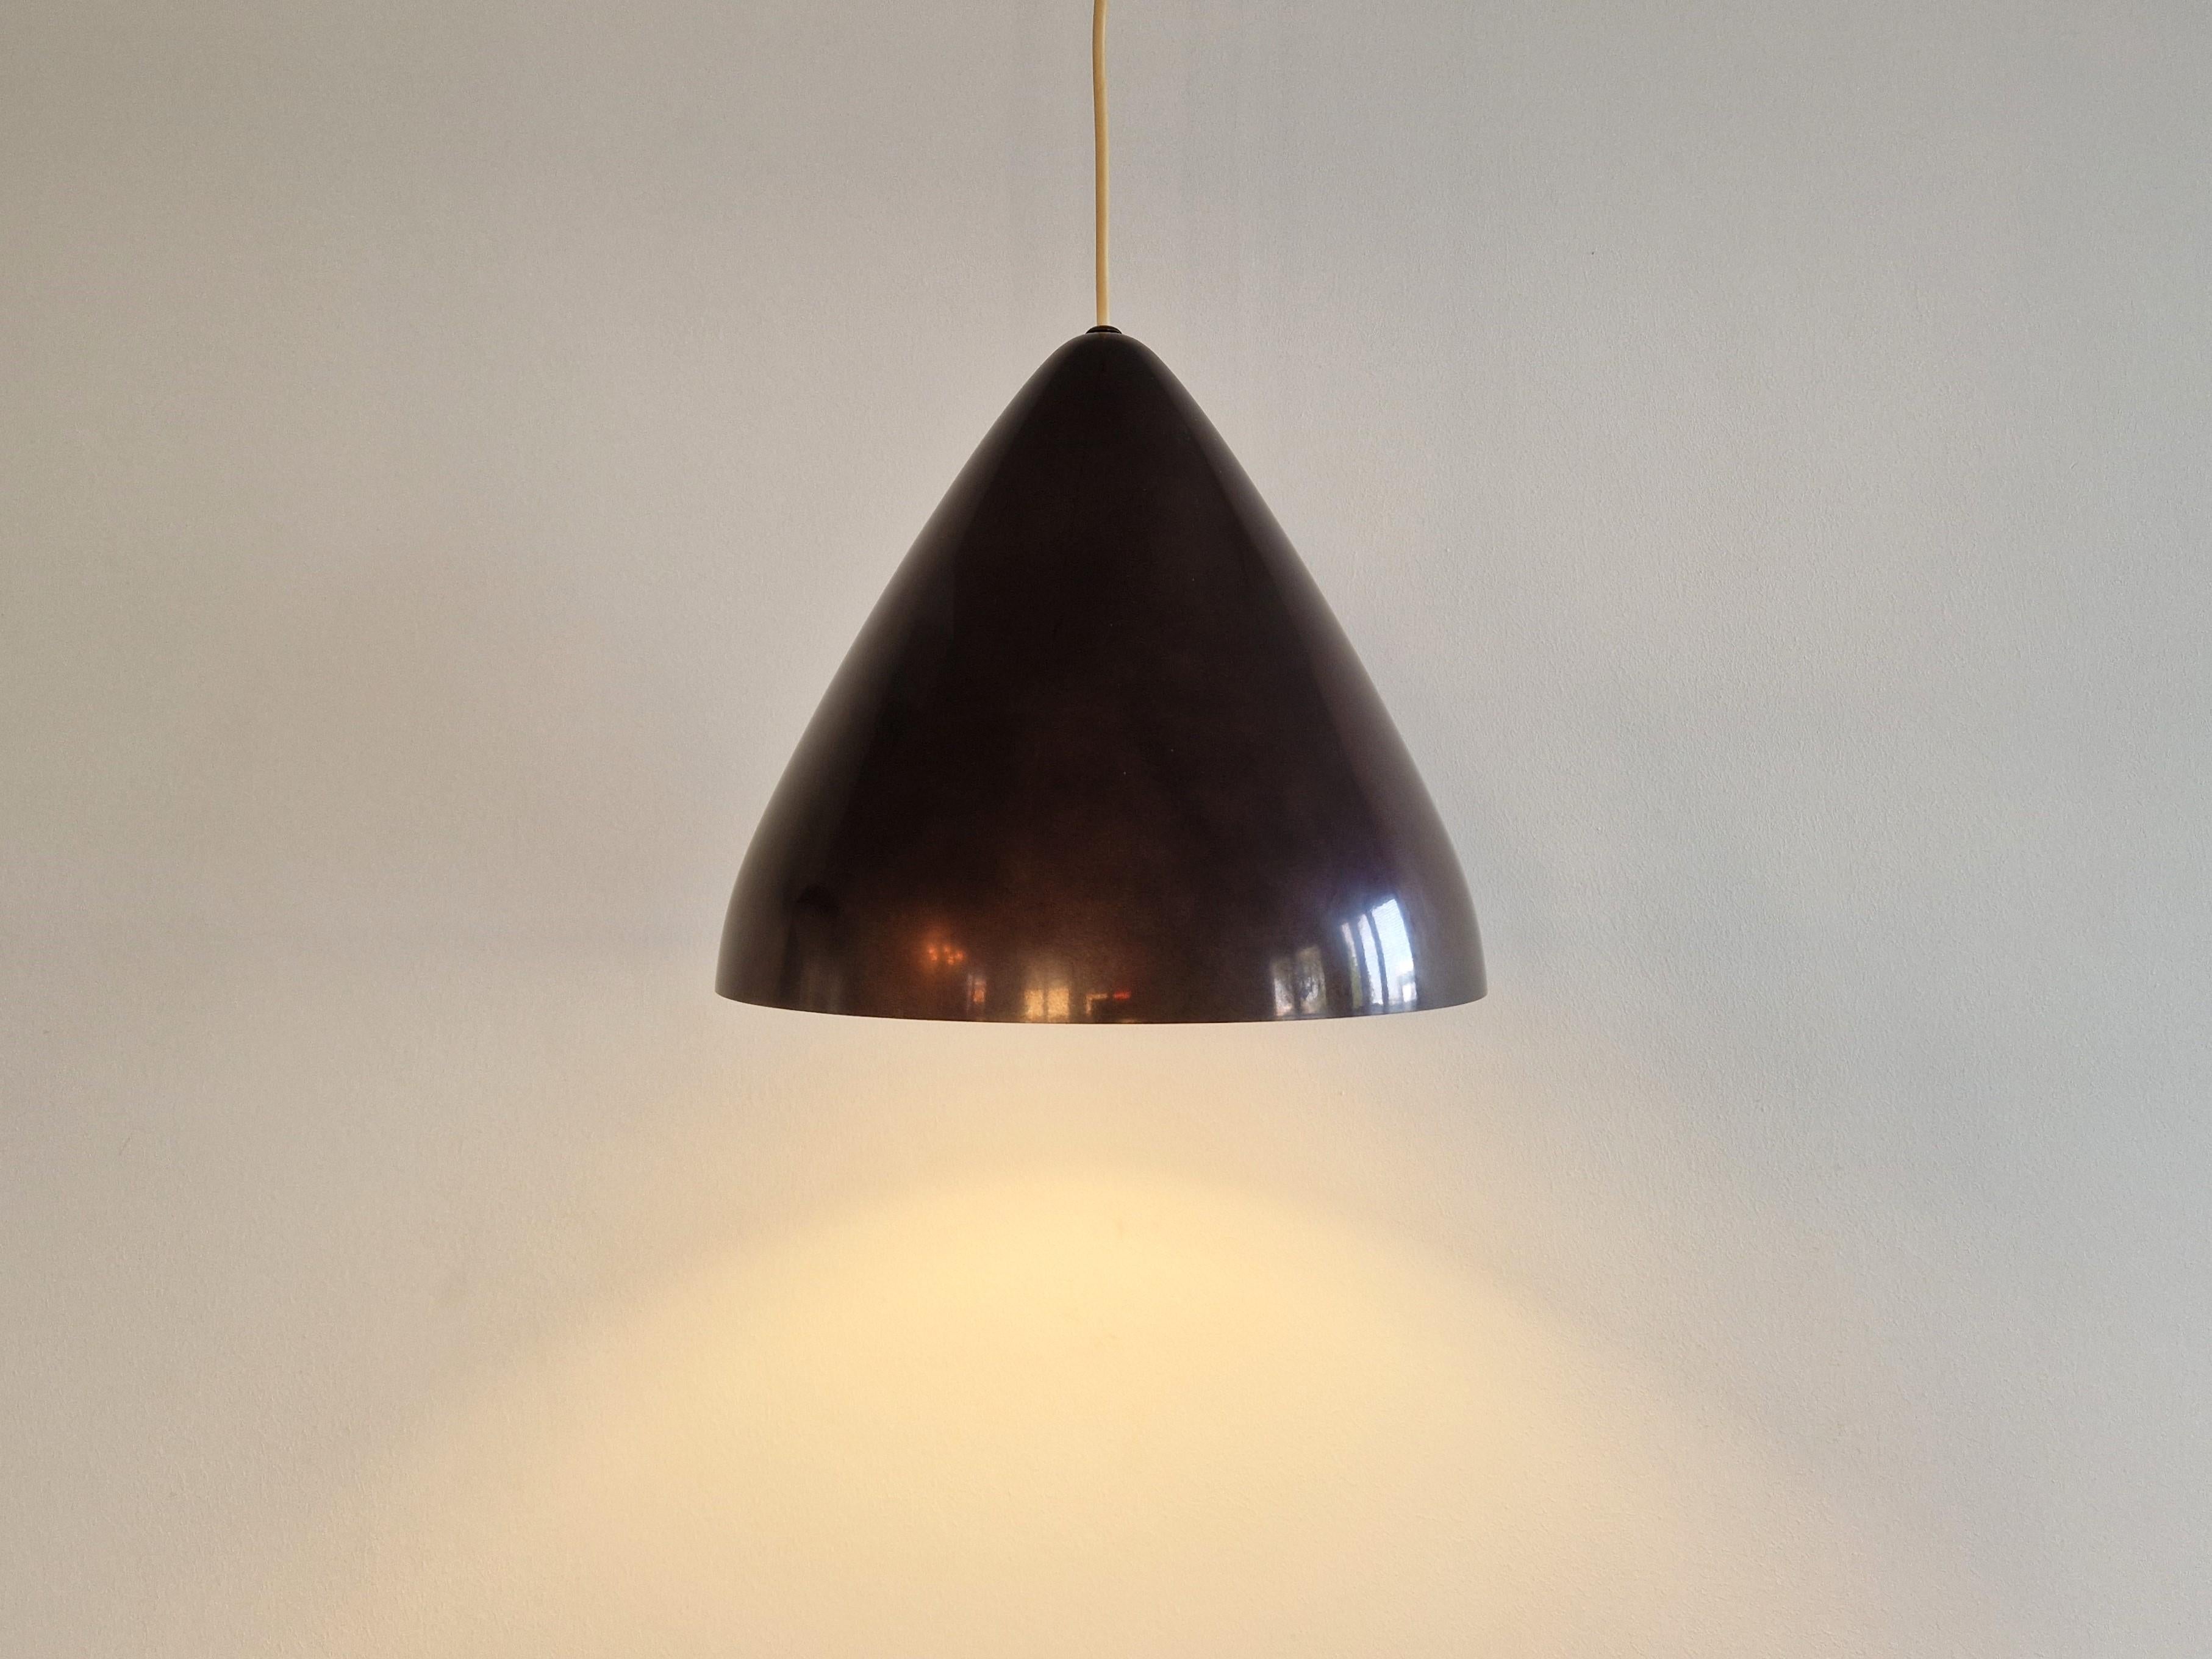 Dark wine red conical pendant lamp by Lisa Johansson-Pape for Orno, Finland 1960 For Sale 1